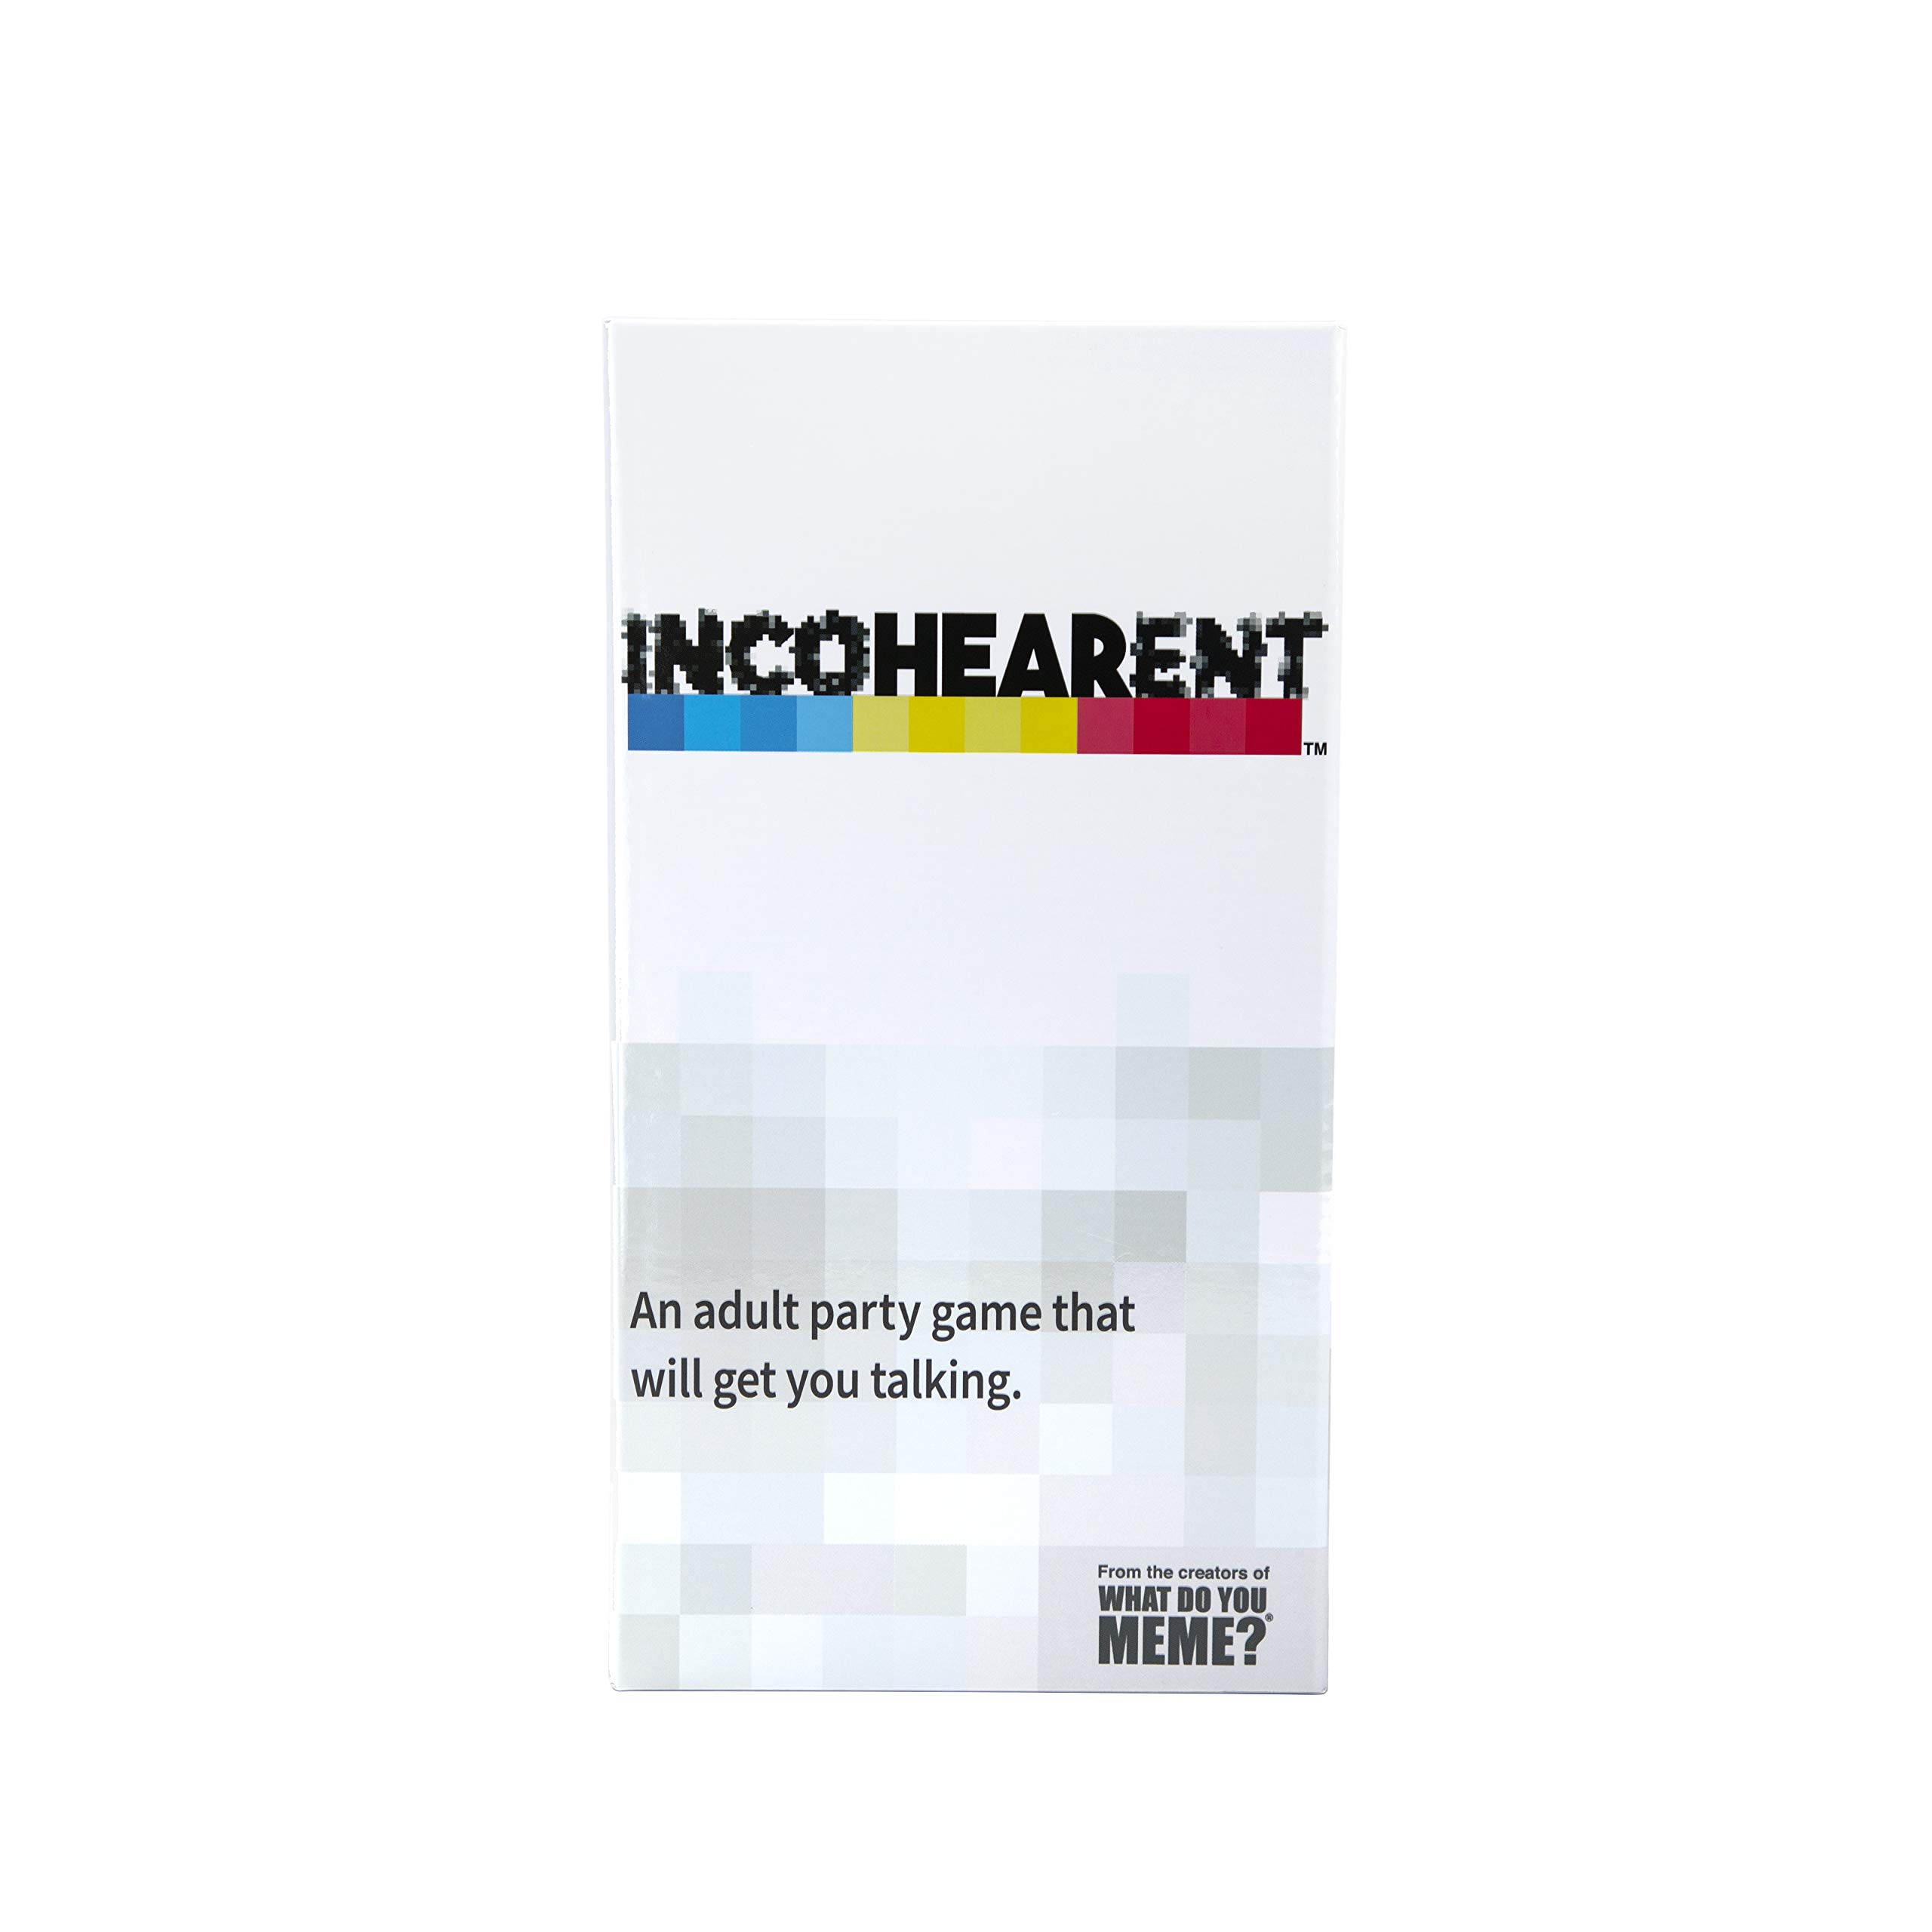 WHAT DO YOU MEME? Incohearent - The Party Game Where You Compete to Guess The Gibberish - Adult Card Games for Game Night